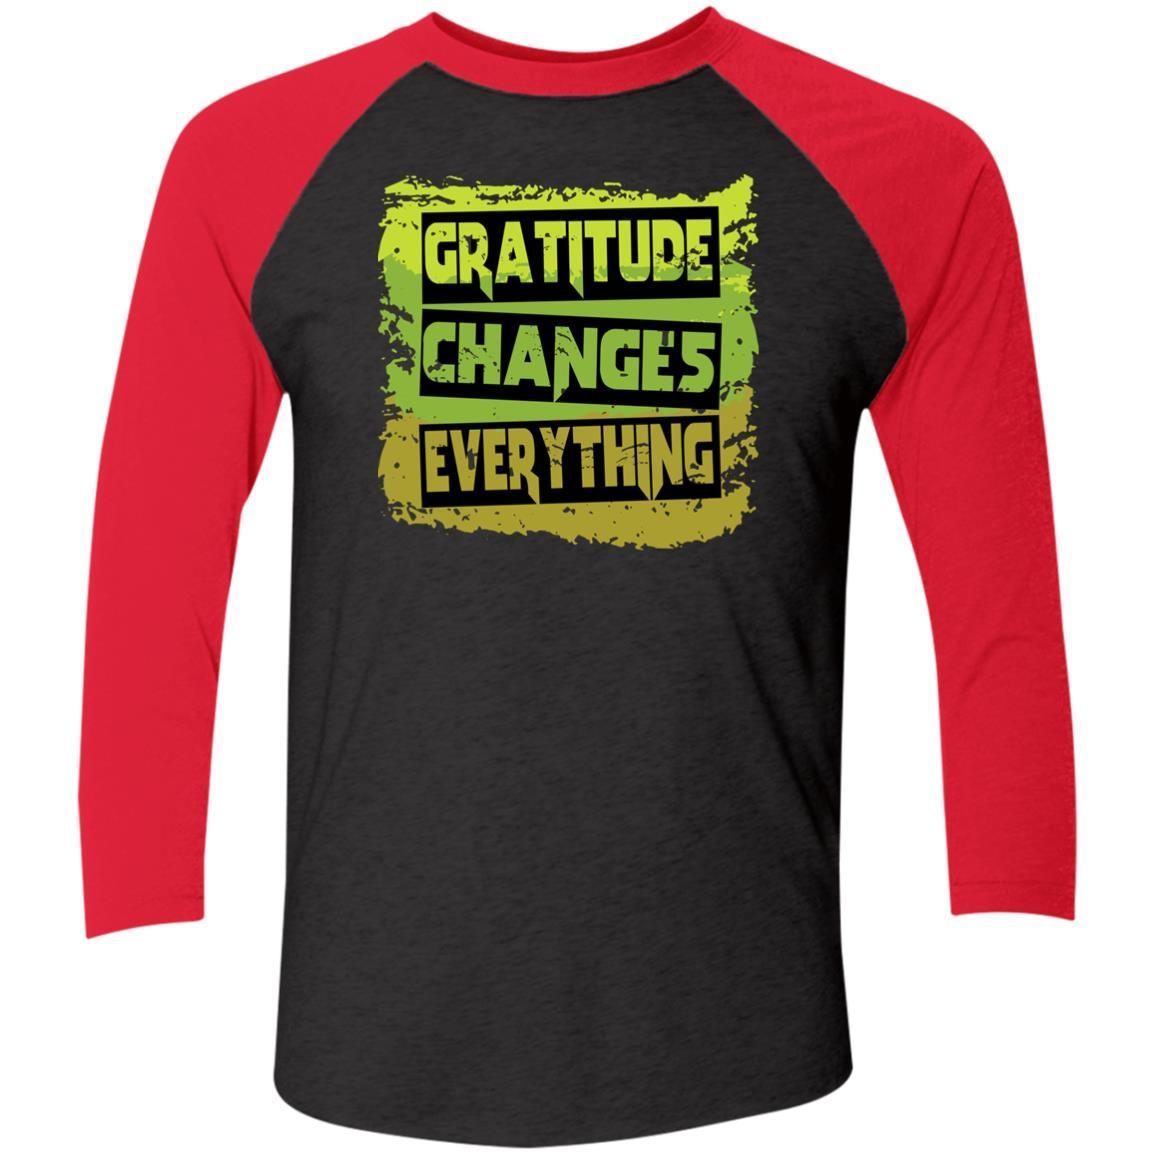 Gratitude Changes Everything Funny Quote shirt 7